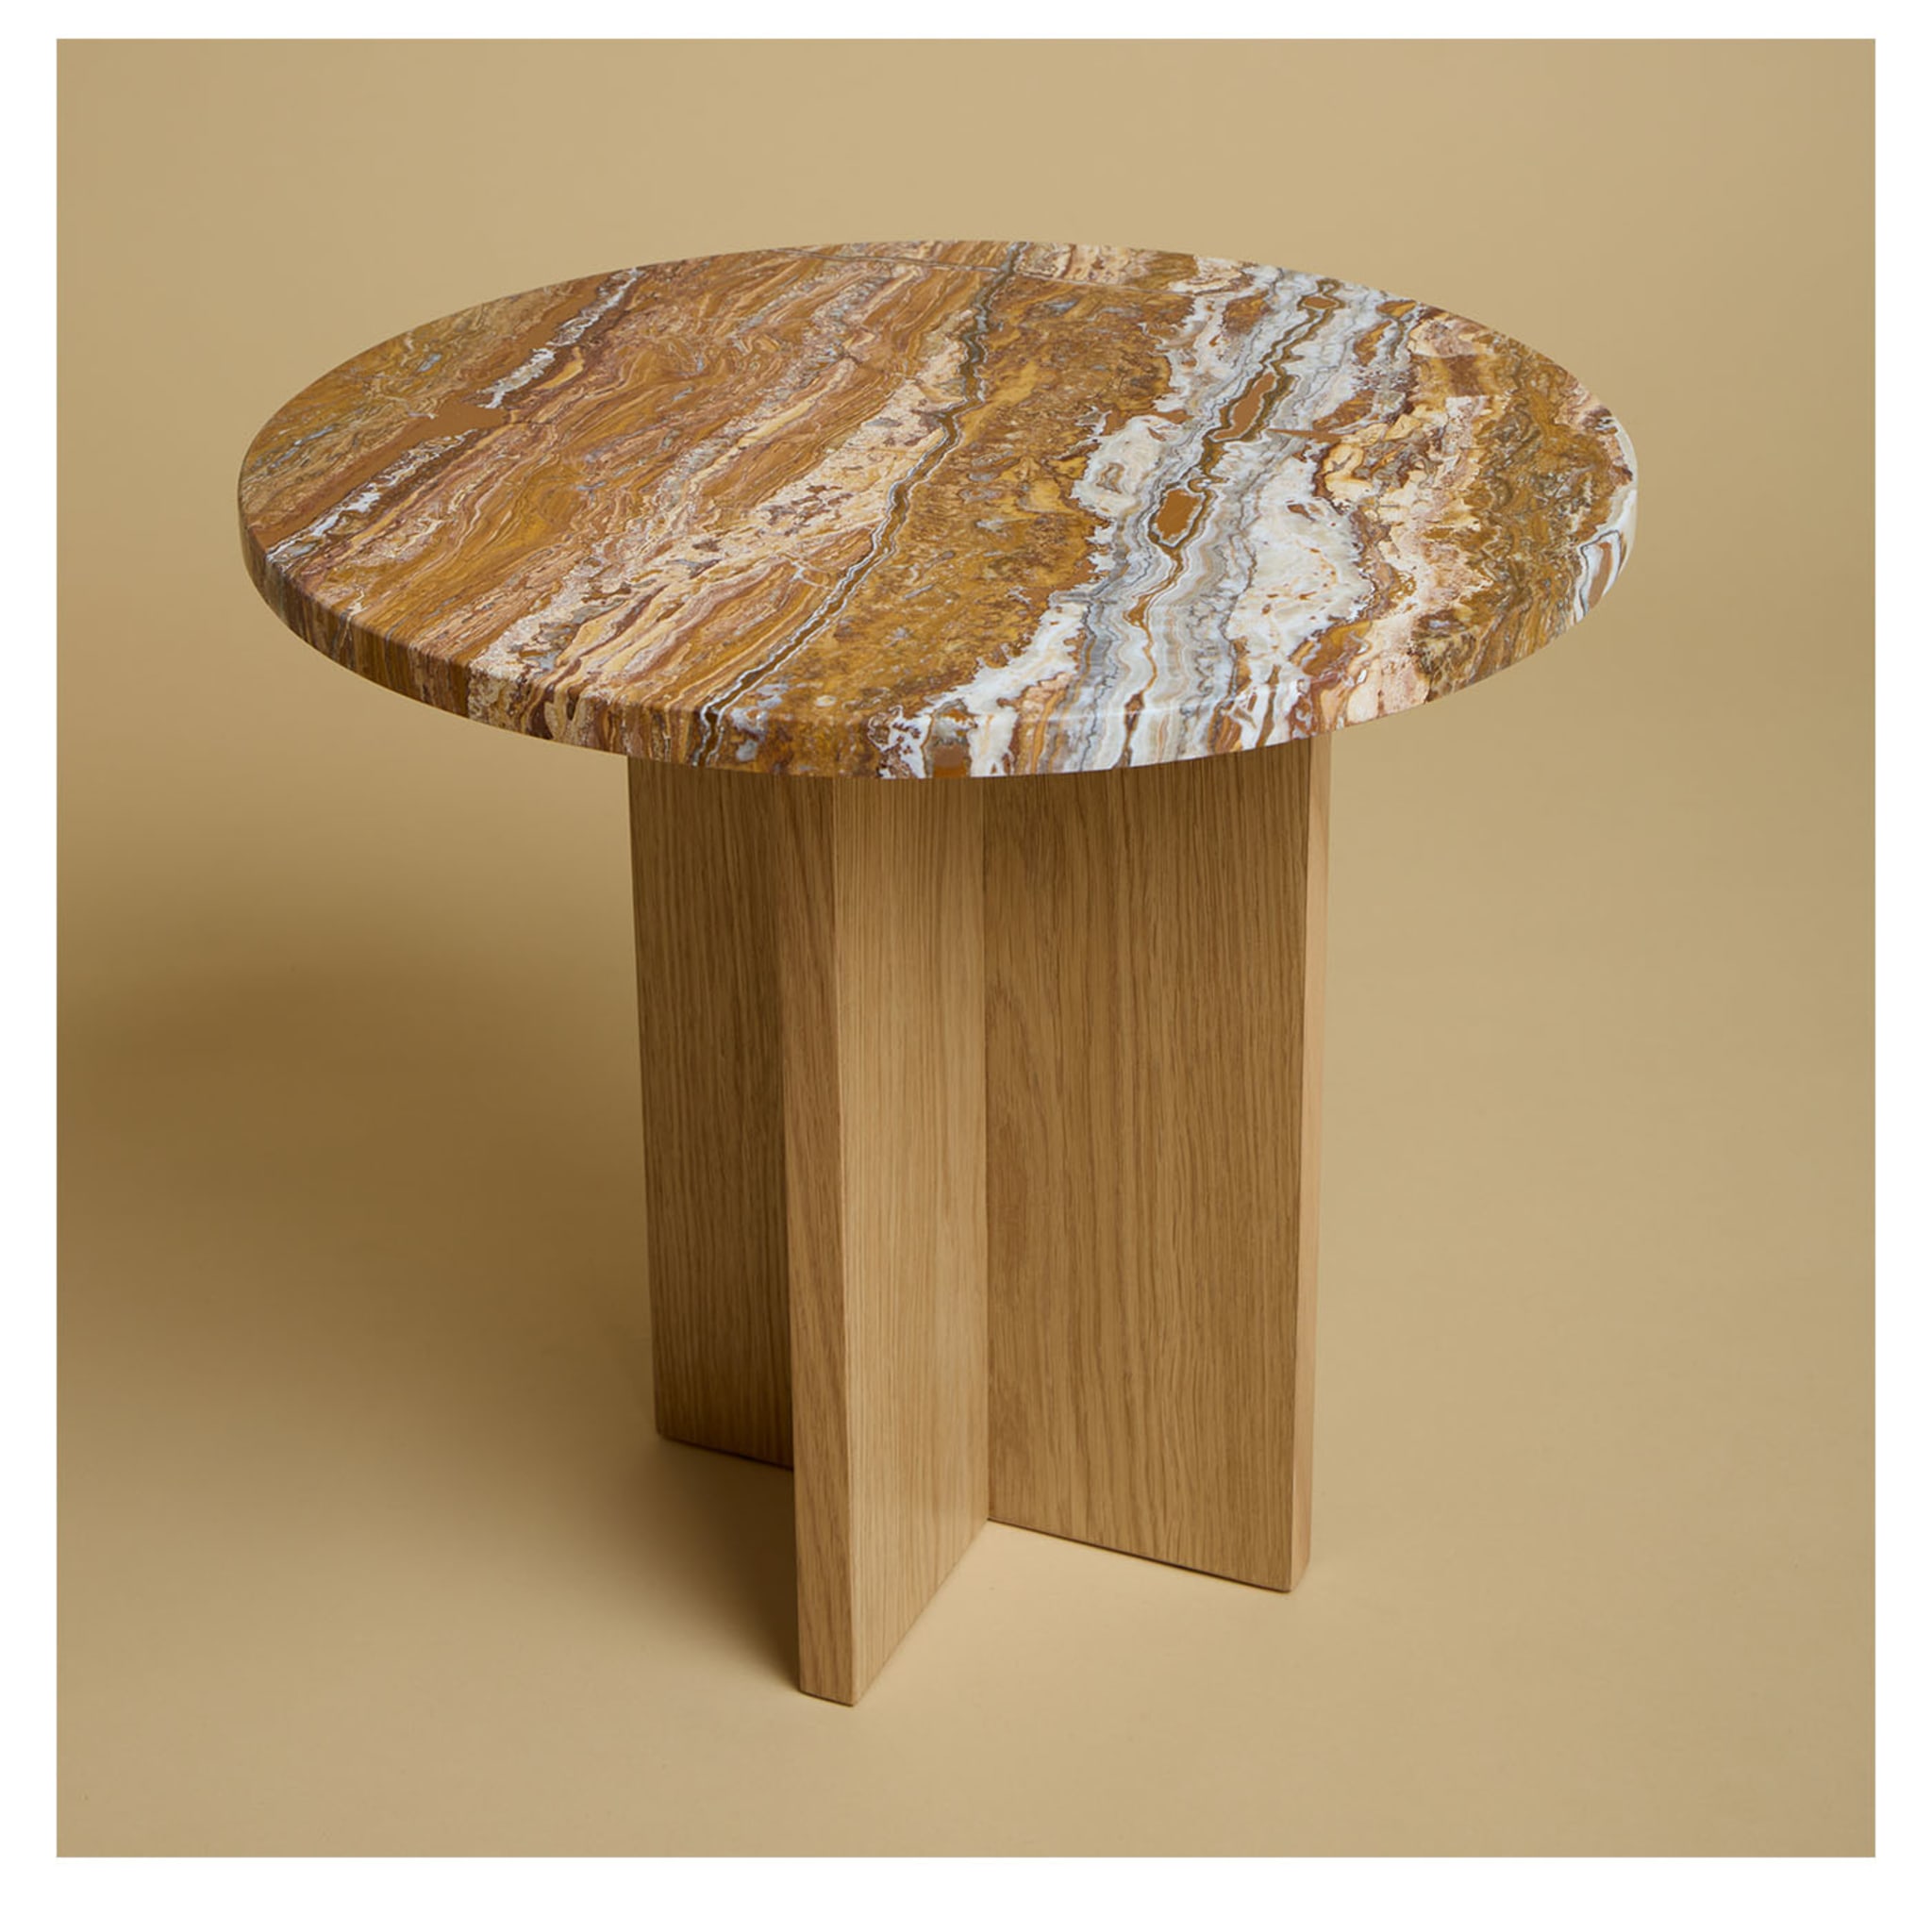 Sherman Travertino and Durmast Side Table - Alternative view 2